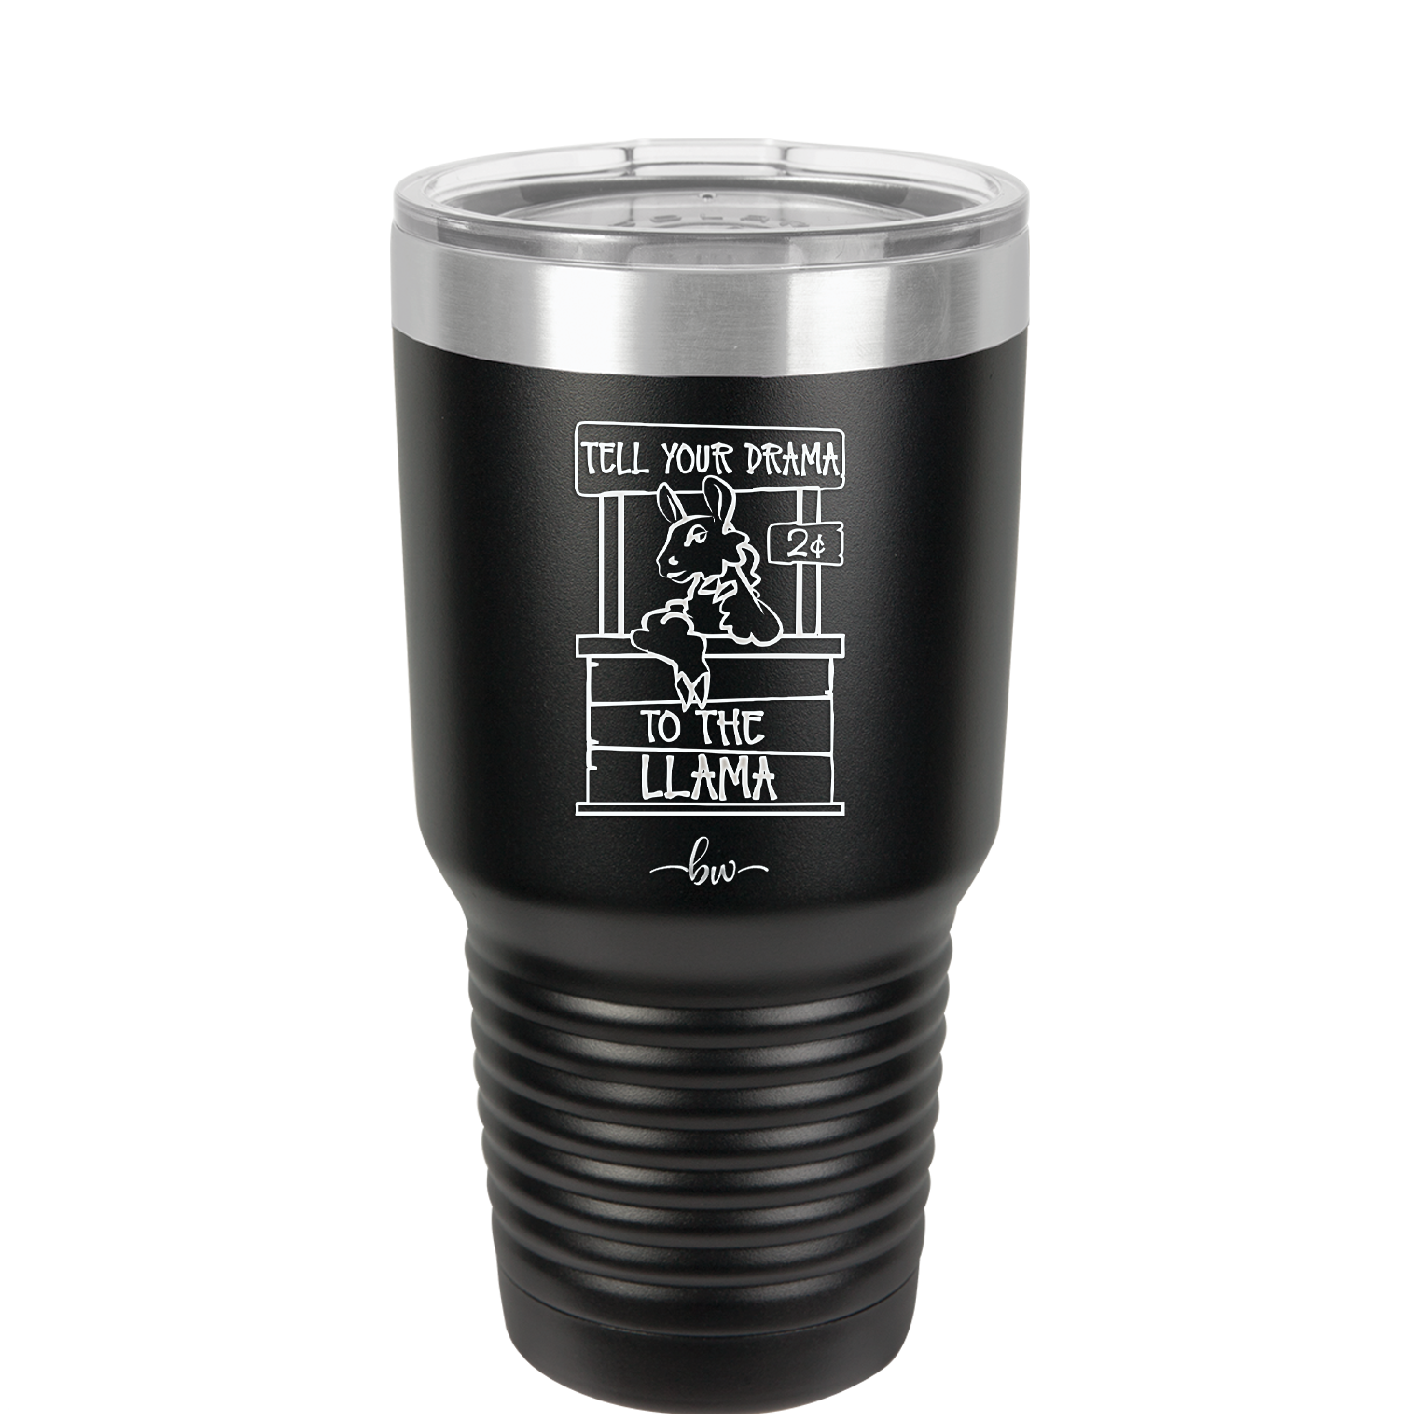 Tell Your Drama to the Llama - Laser Engraved Stainless Steel Drinkware - 1869 -